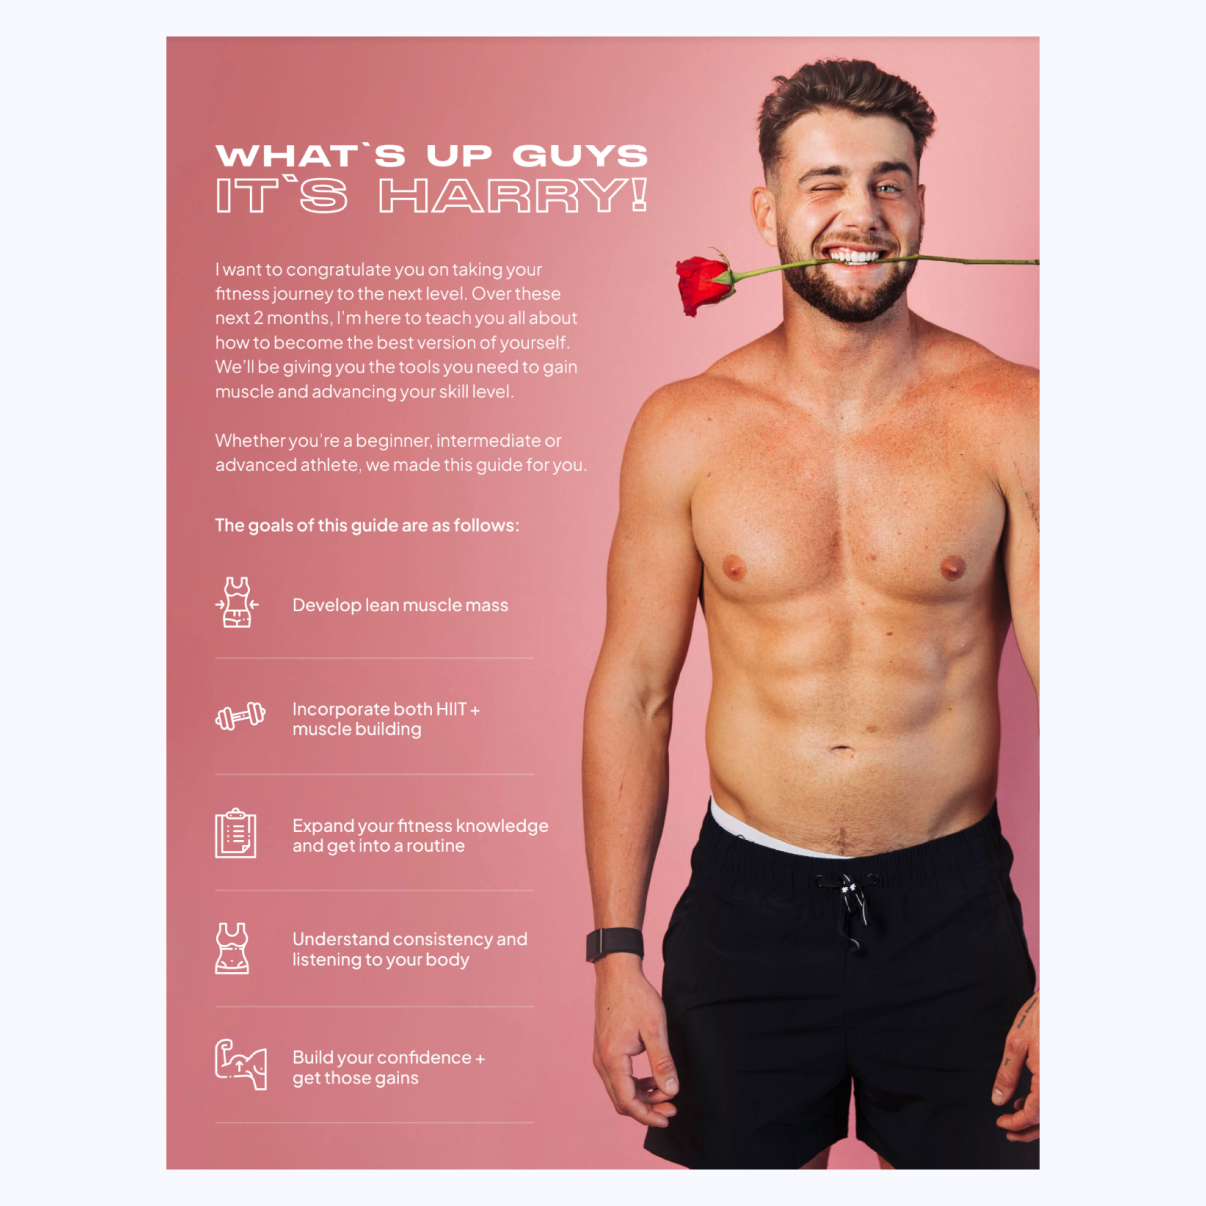 Harry Jowsey’s Shred Guide Bundle for Ladies